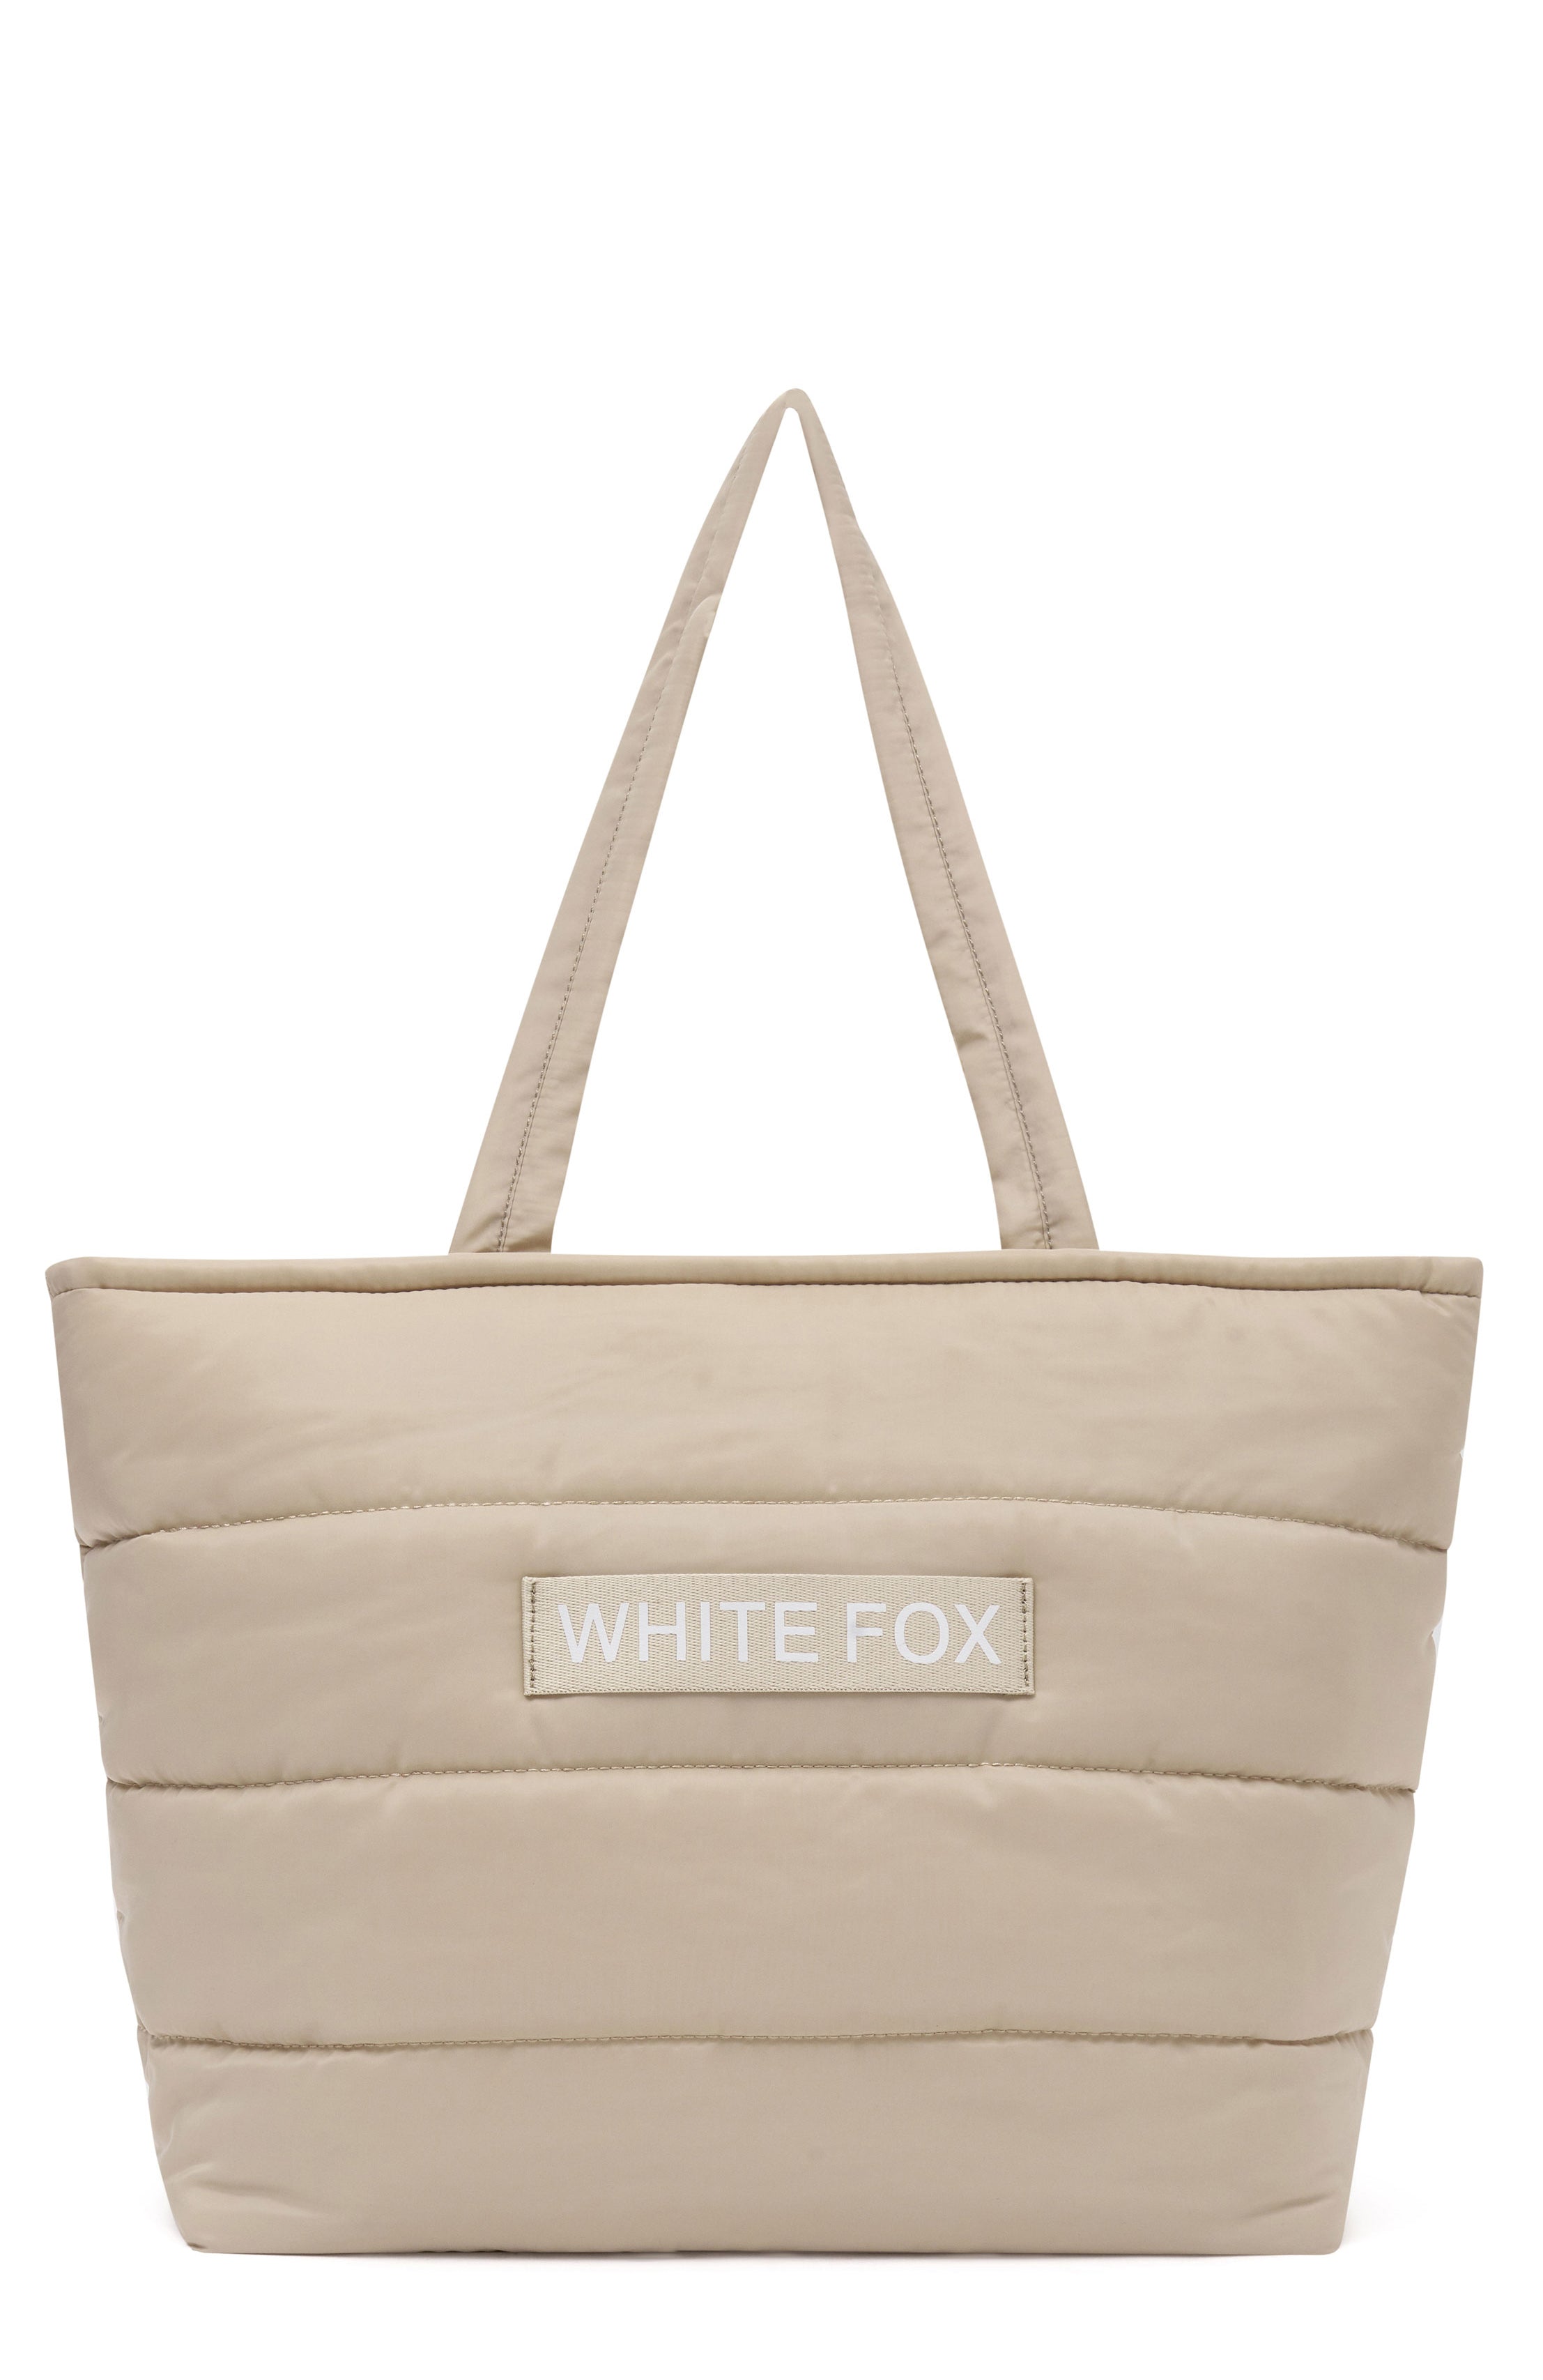 Puffer Tote Bag Black - White Fox Boutique Accessories - One Size - Shop with Afterpay